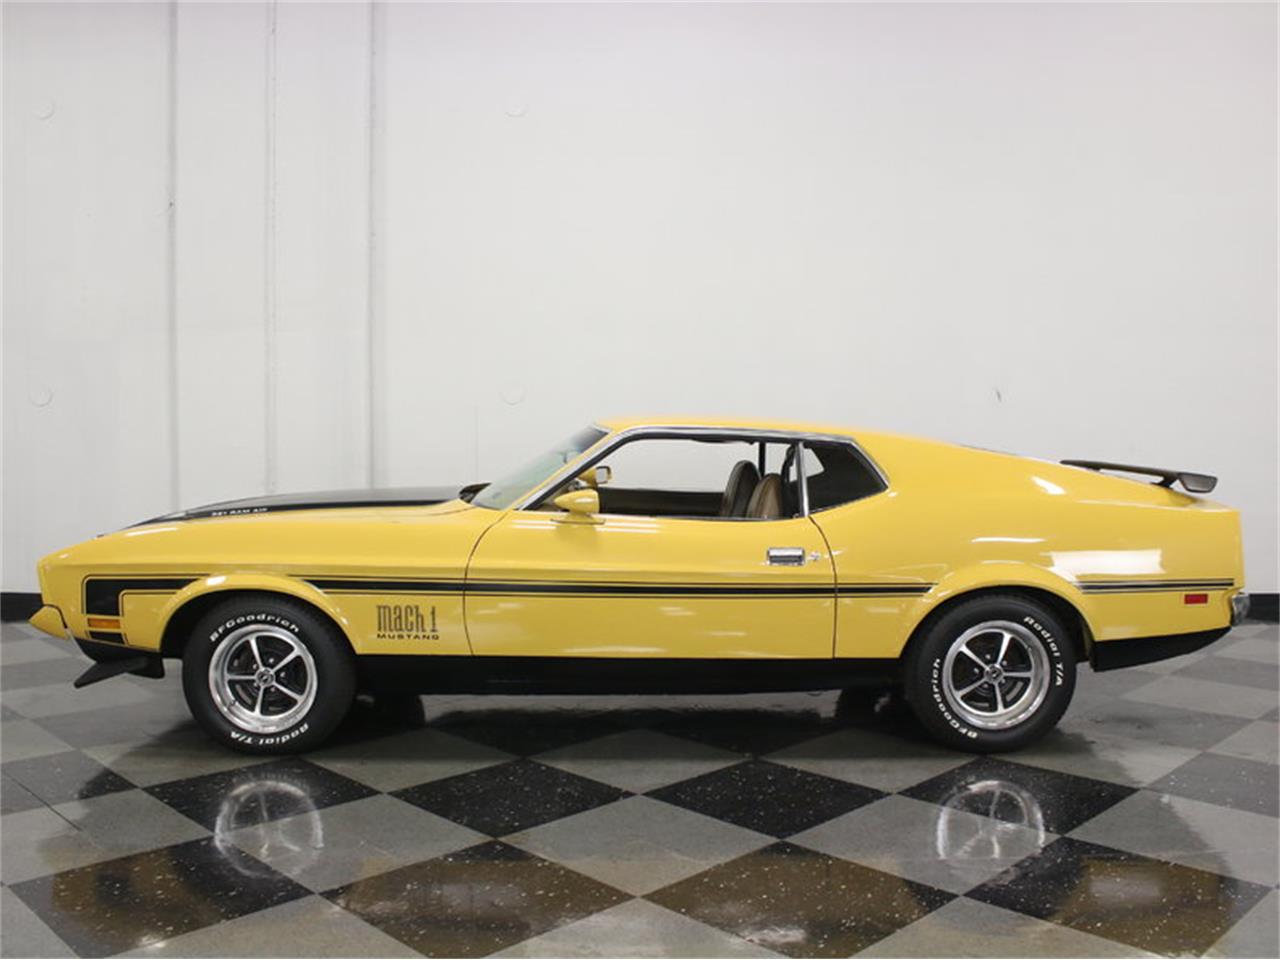 1971 Ford Mustang Mach 1 for Sale | ClassicCars.com | CC-939366